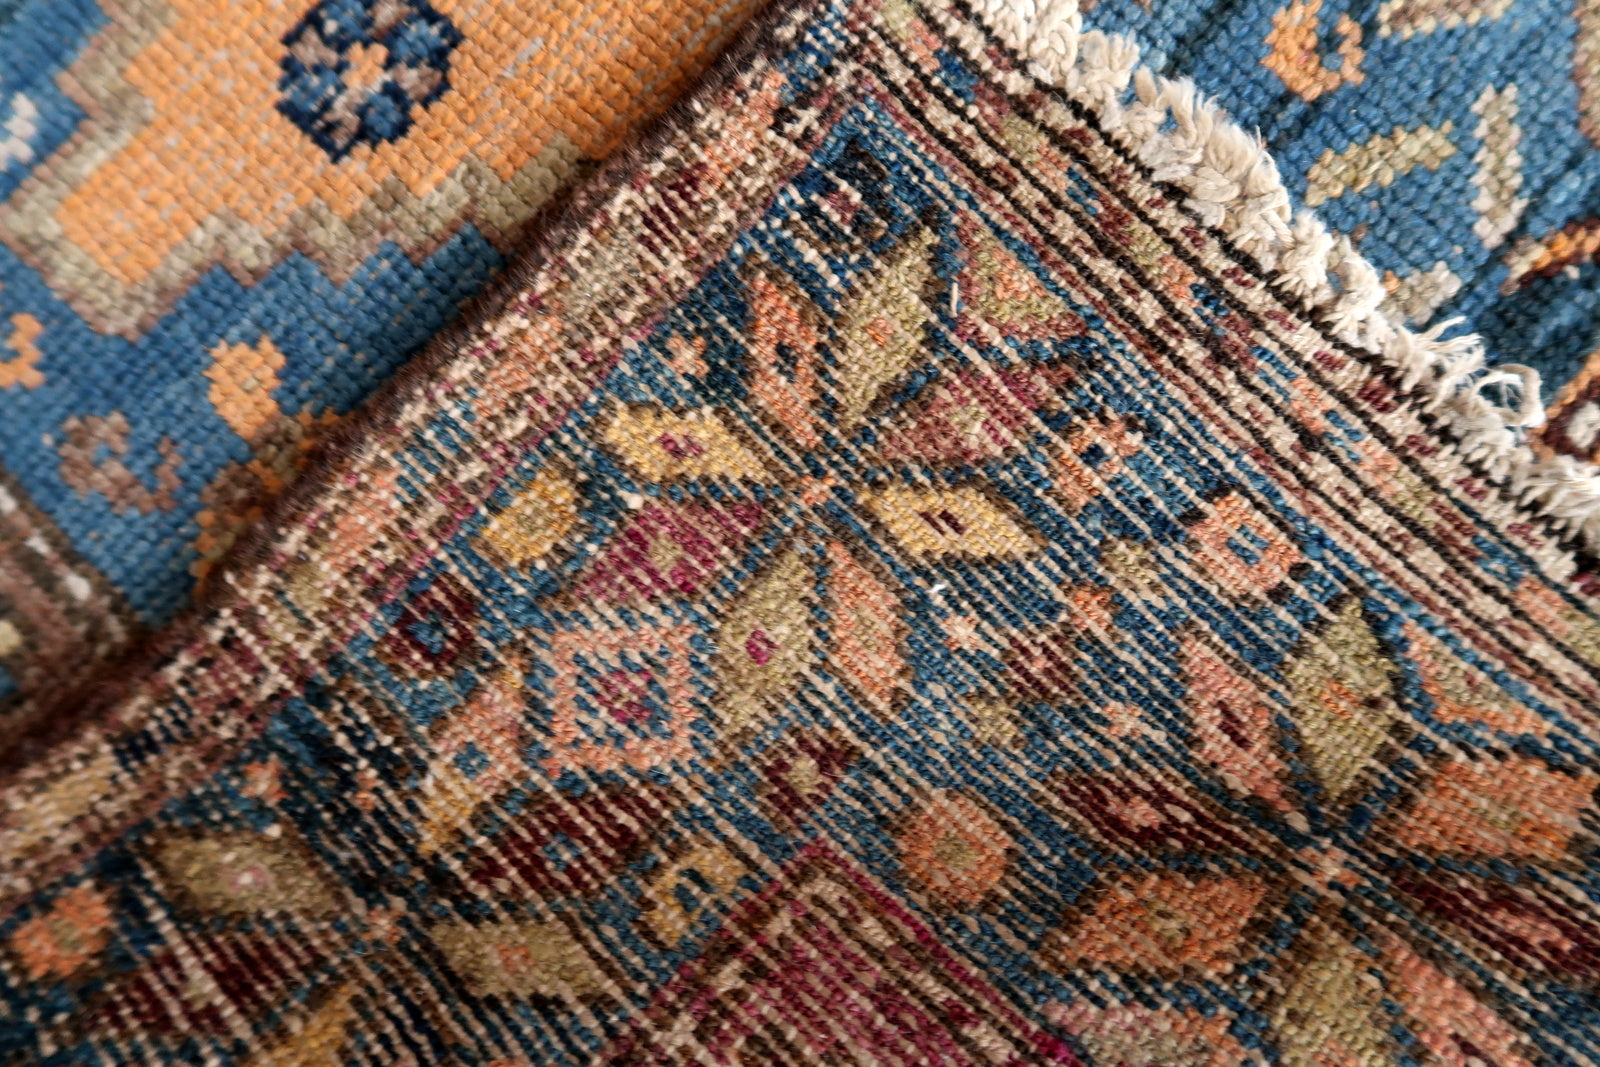 Back side of the Handmade Antique Caucasian Shirvan Rug - Underside view revealing handcrafted wool material.